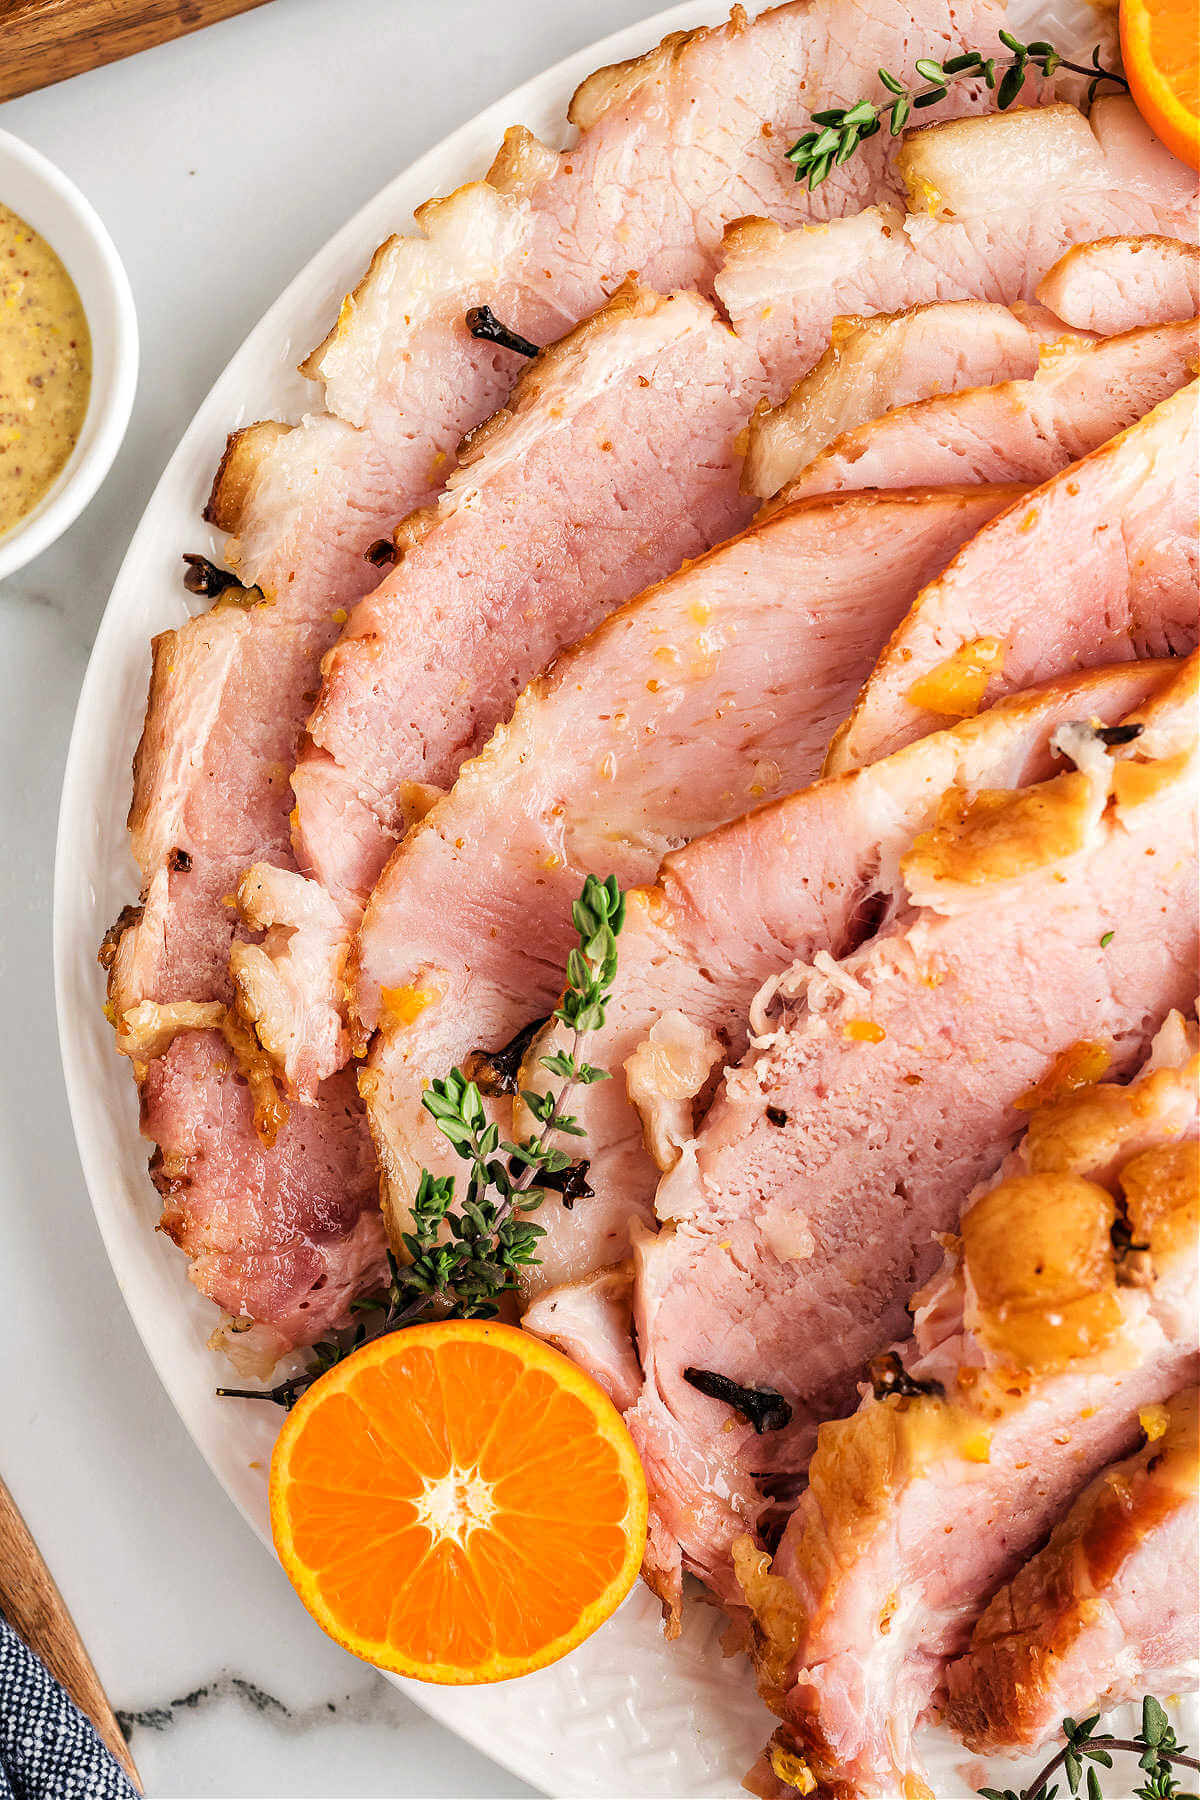 close up.image of slices of baked ham on a platter garnished with orange slices on a table.